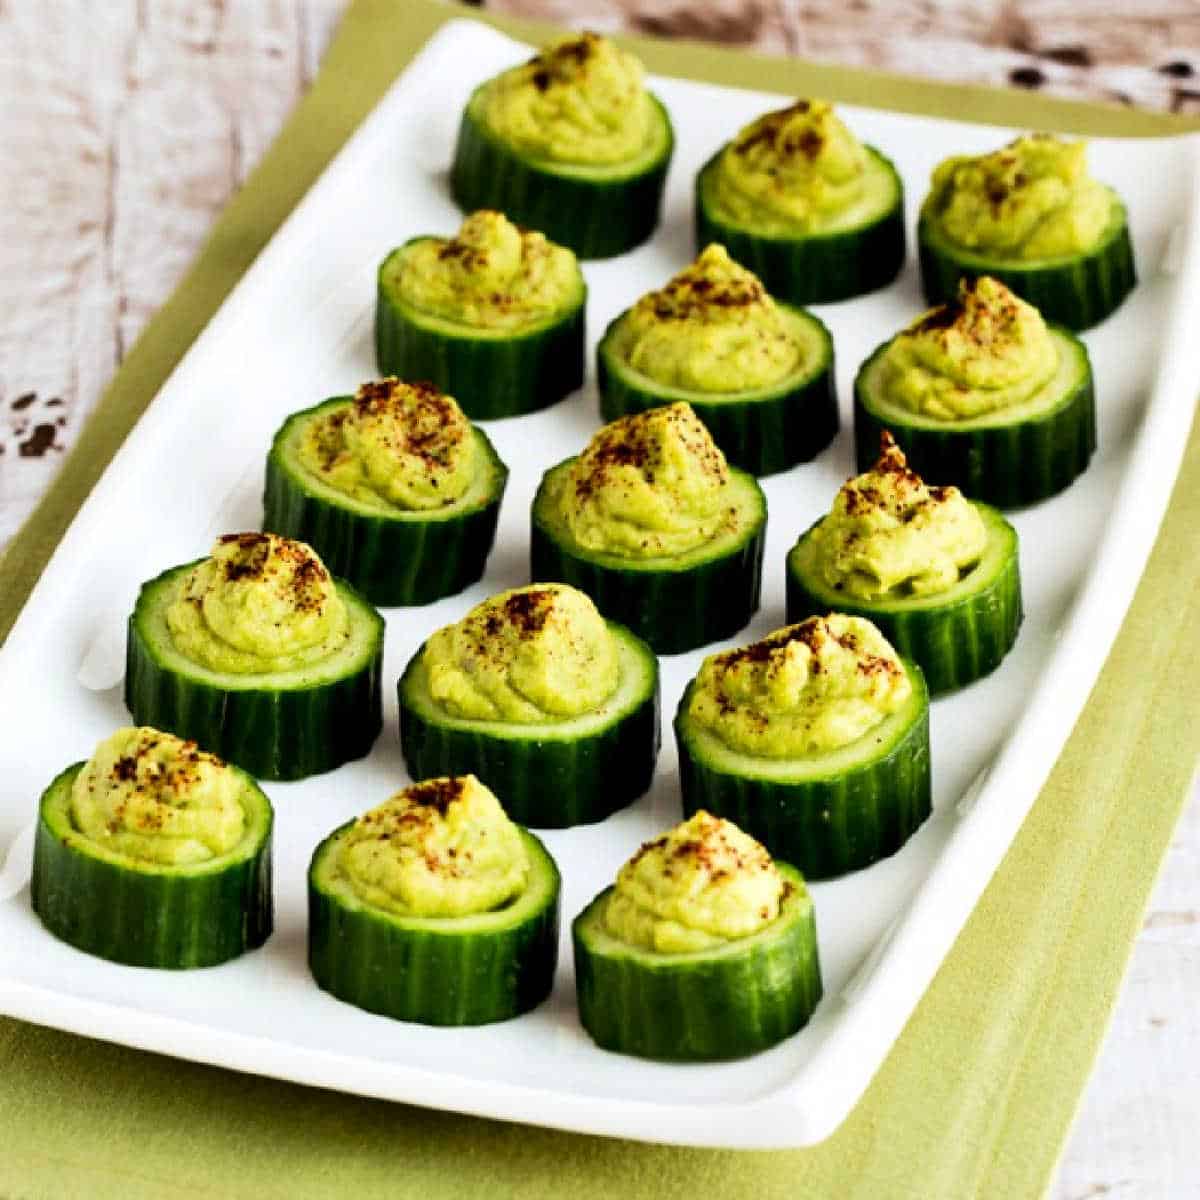 Cucumber Guacamole Appetizer Bites shown on serving platter with green napkin.